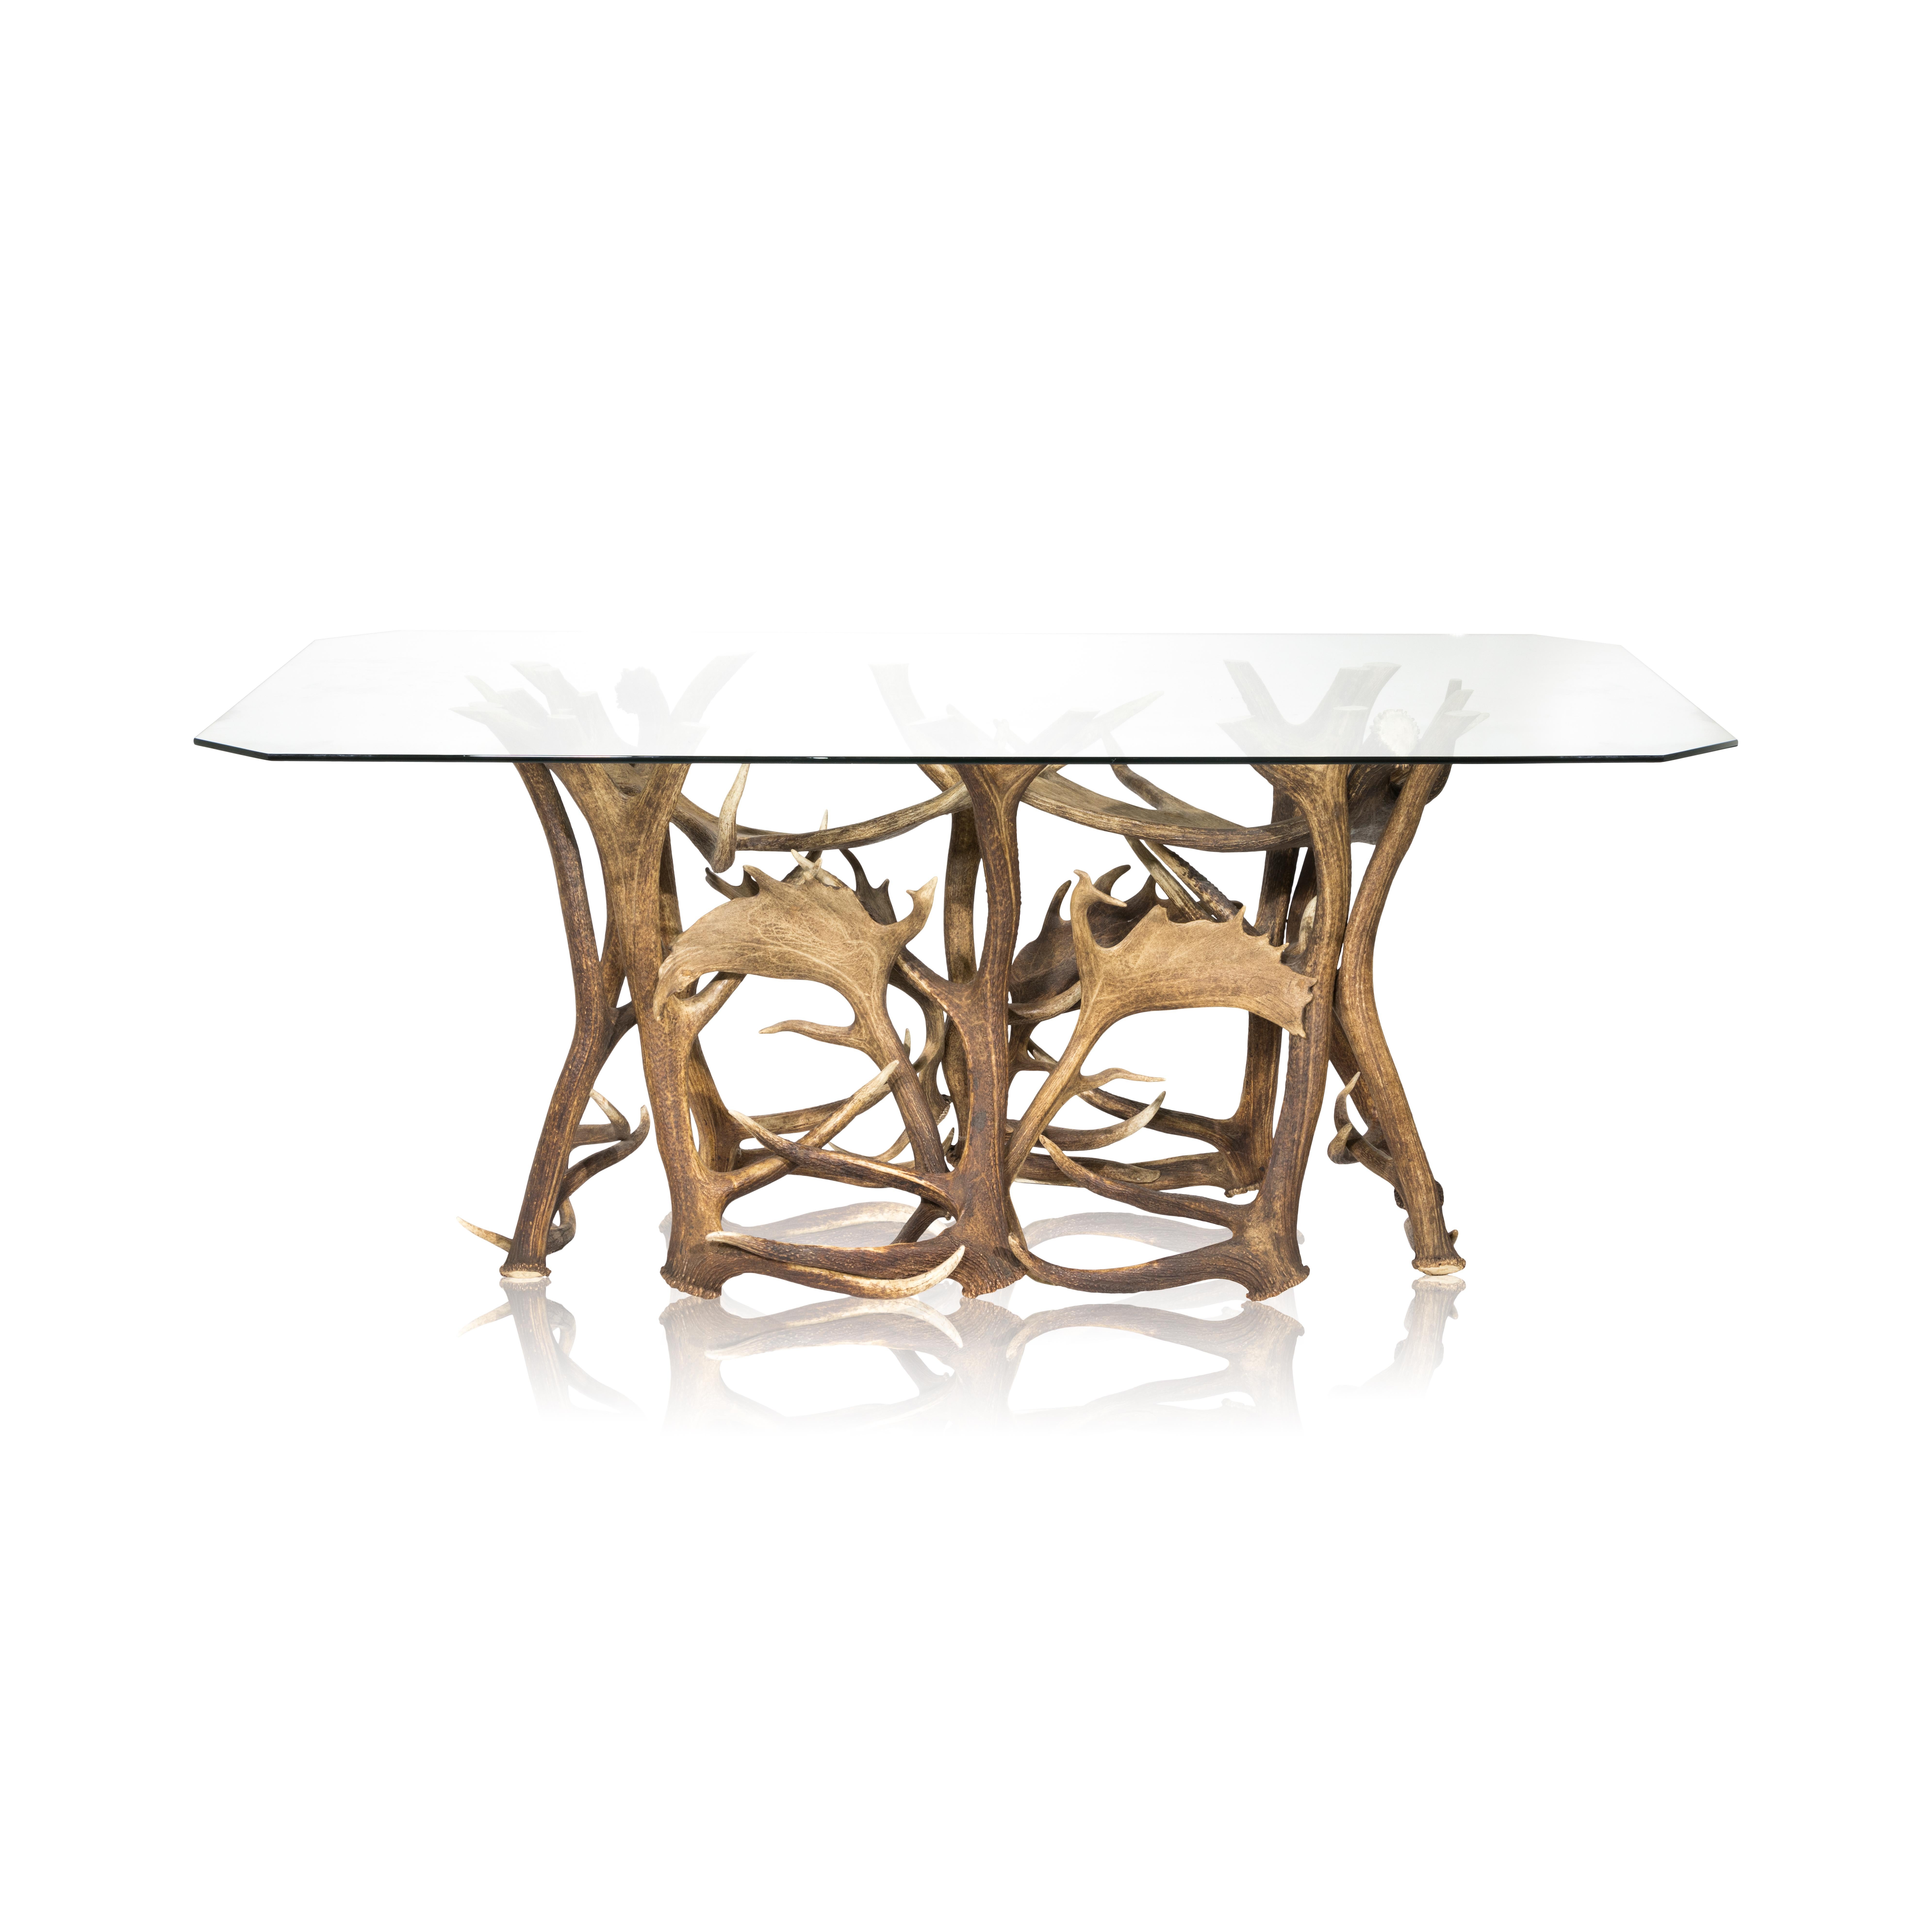 Antler Dining Room Table For Sale